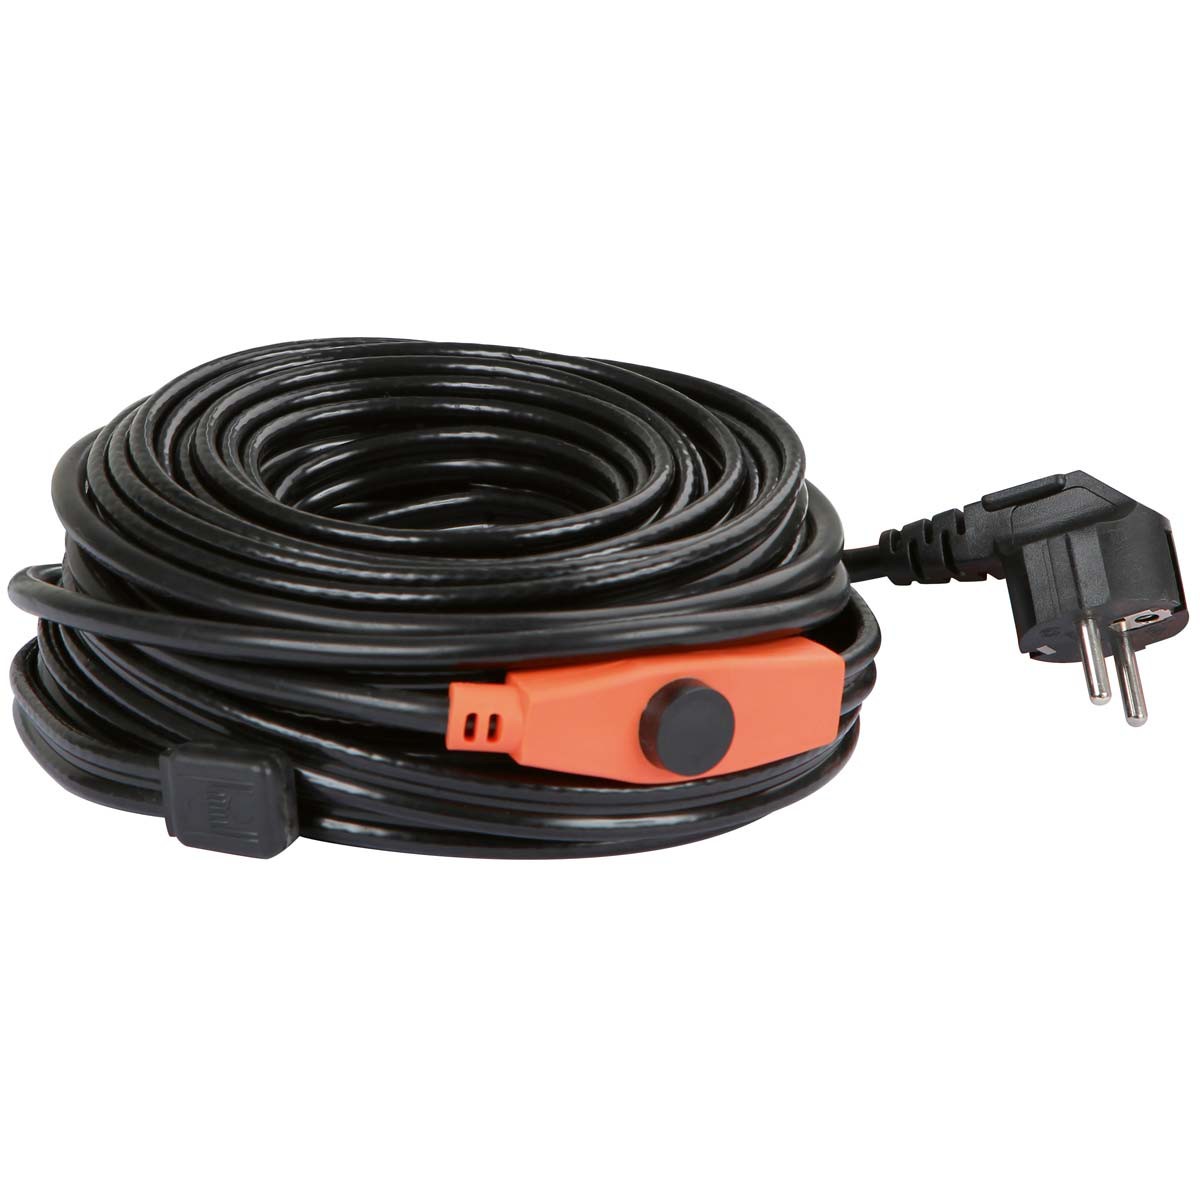 Frost-protection heating cable with thermostat 230V 24 m